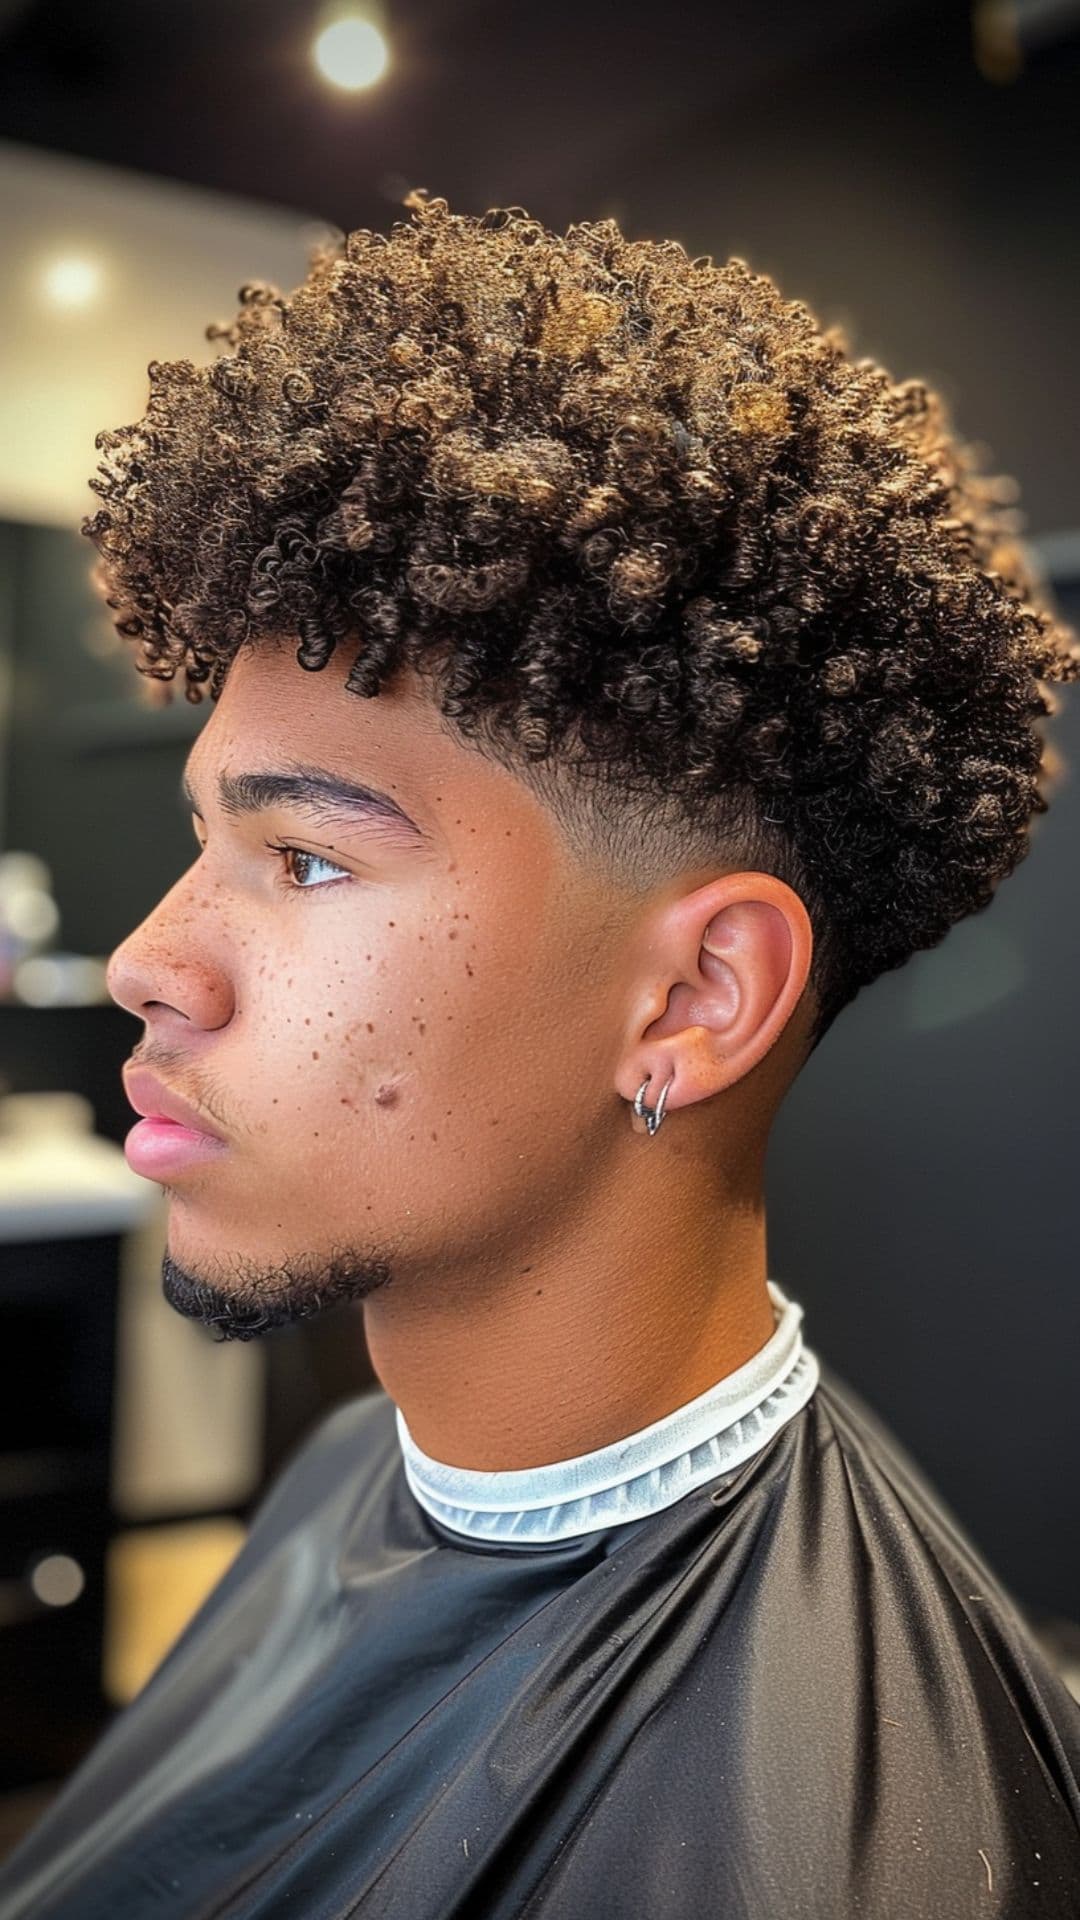 A man modelling a curly taper fade hairstyle.